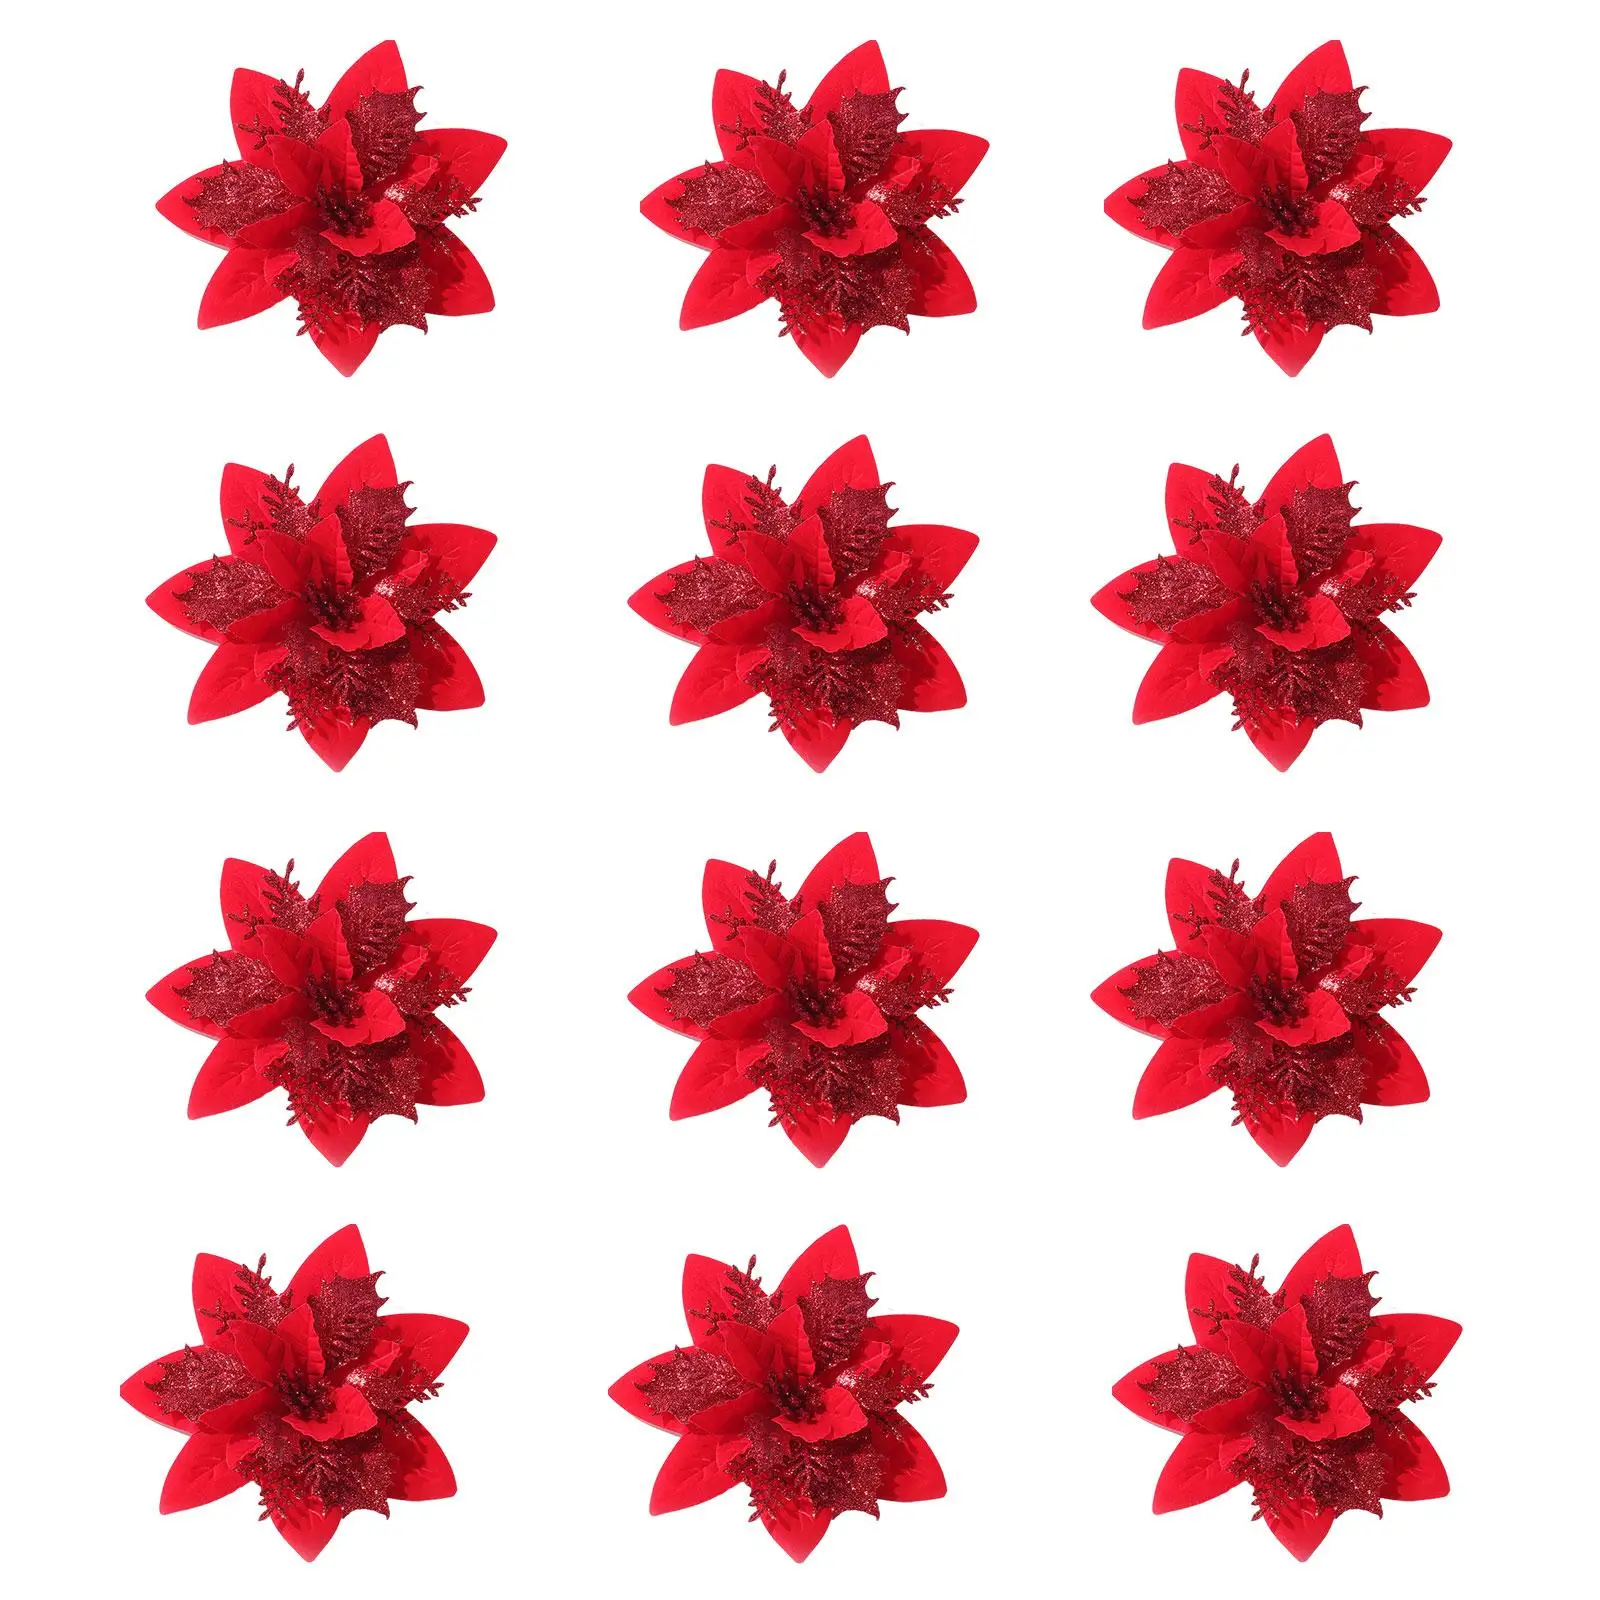 12x Glitter Christmas Flowers, Artificial Flowers Heads Christmas Tree Flower Decorations for Holiday Xmas Garland DIY Wreath